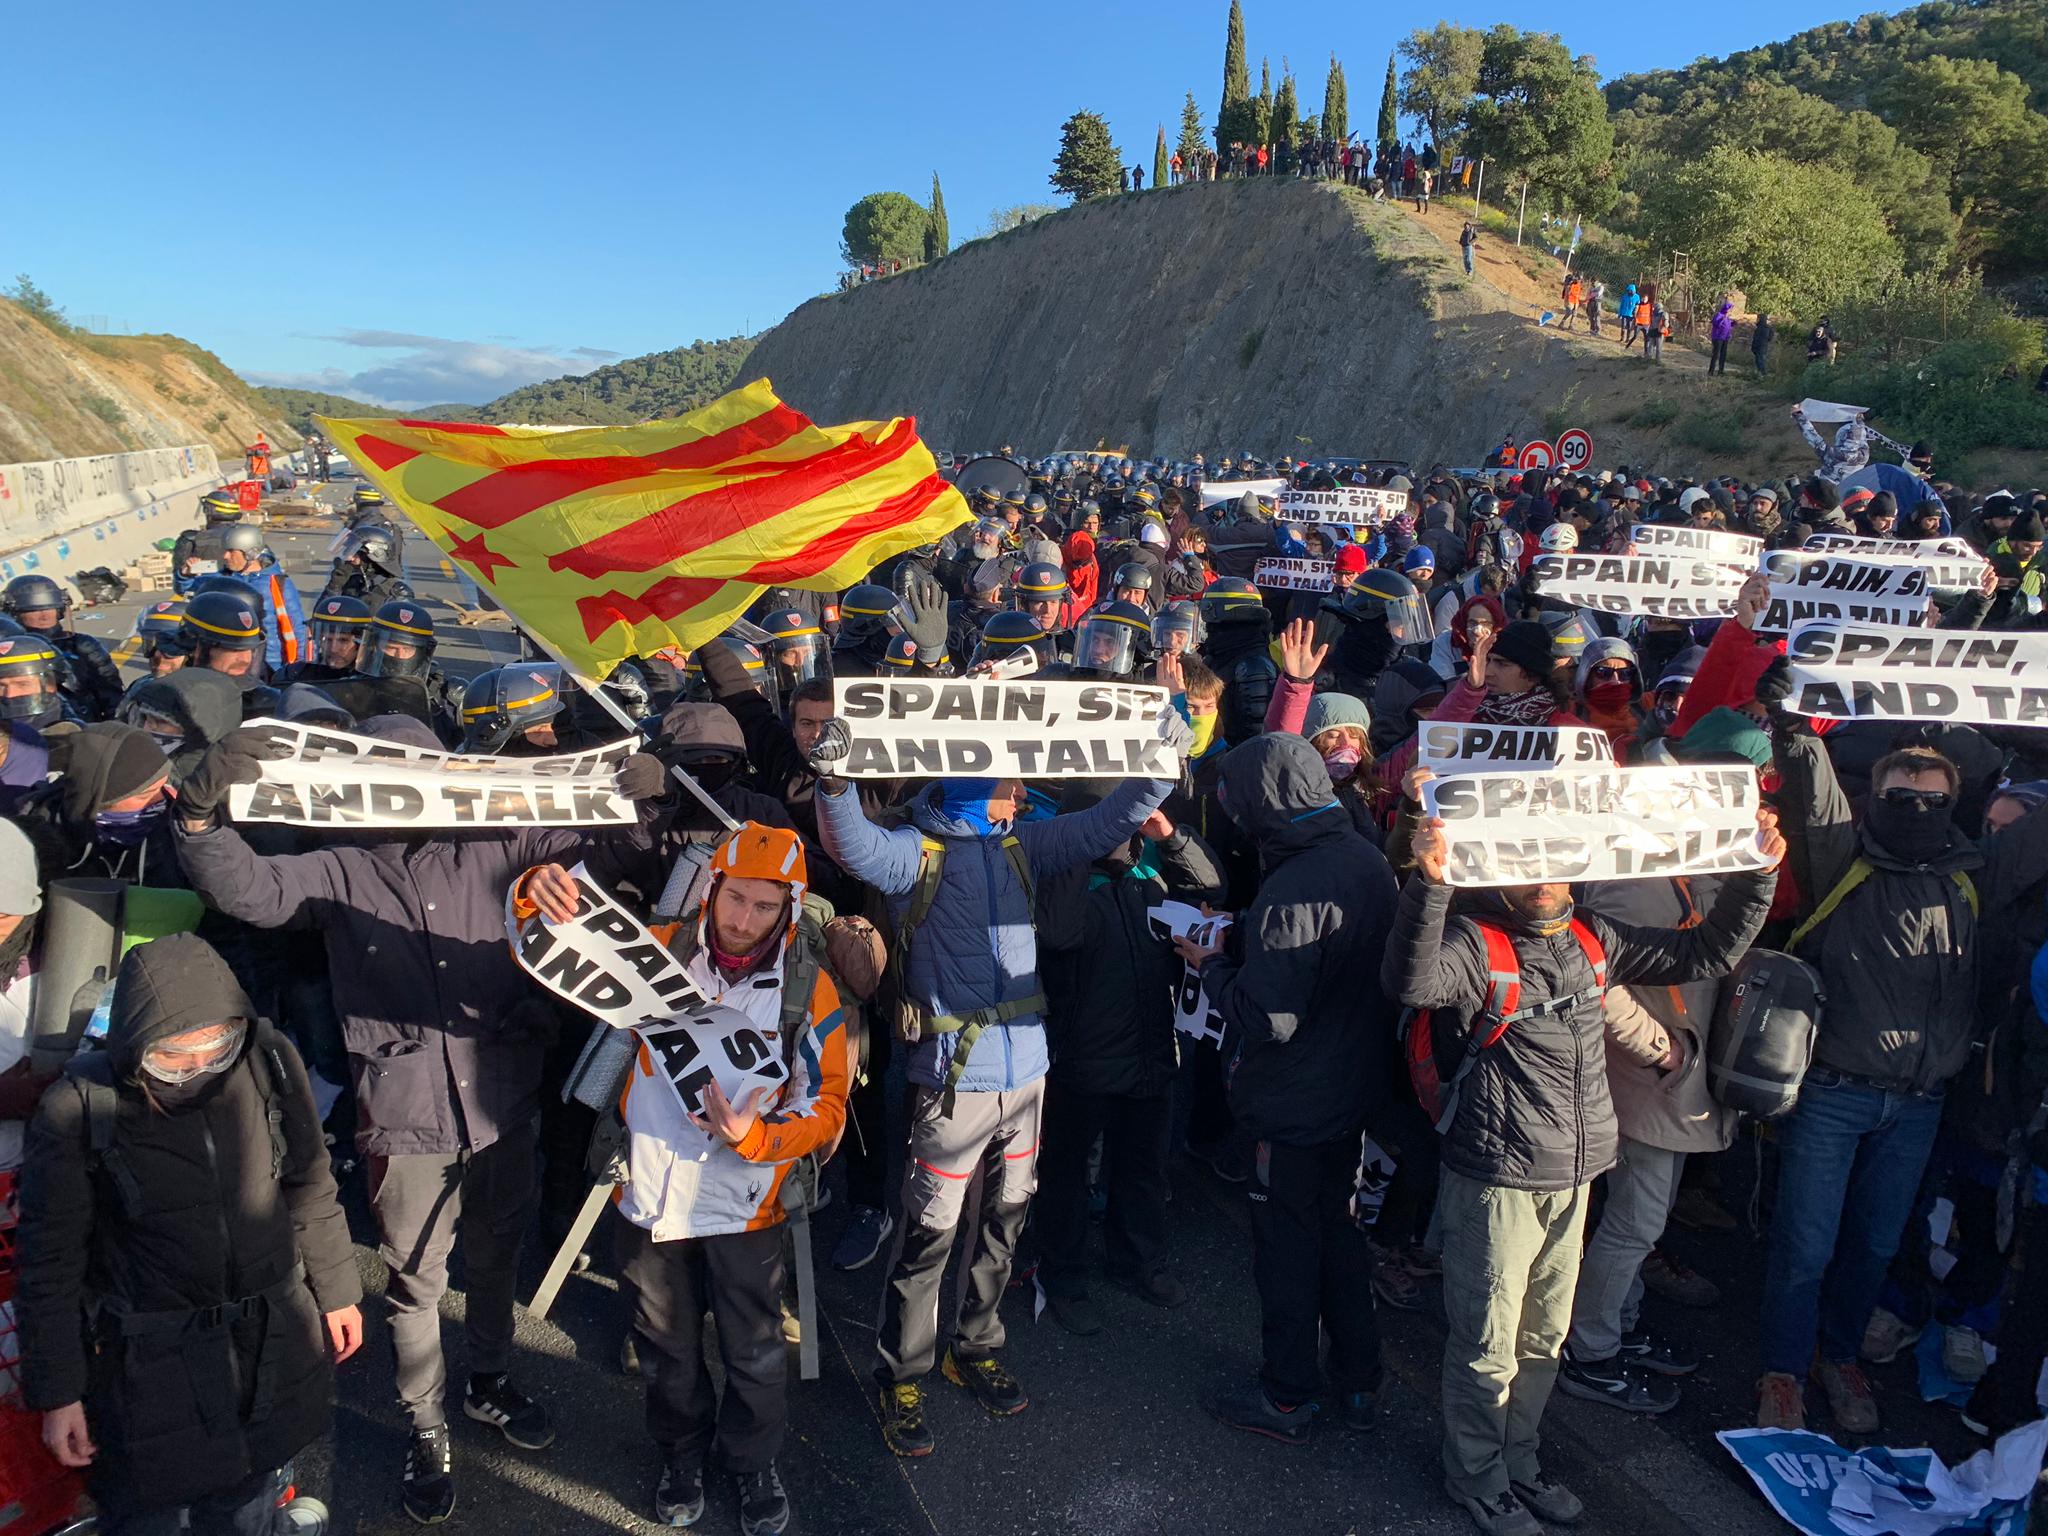 Border protest treated as 'road obstruction' case by France, 'terrorism' by Spain